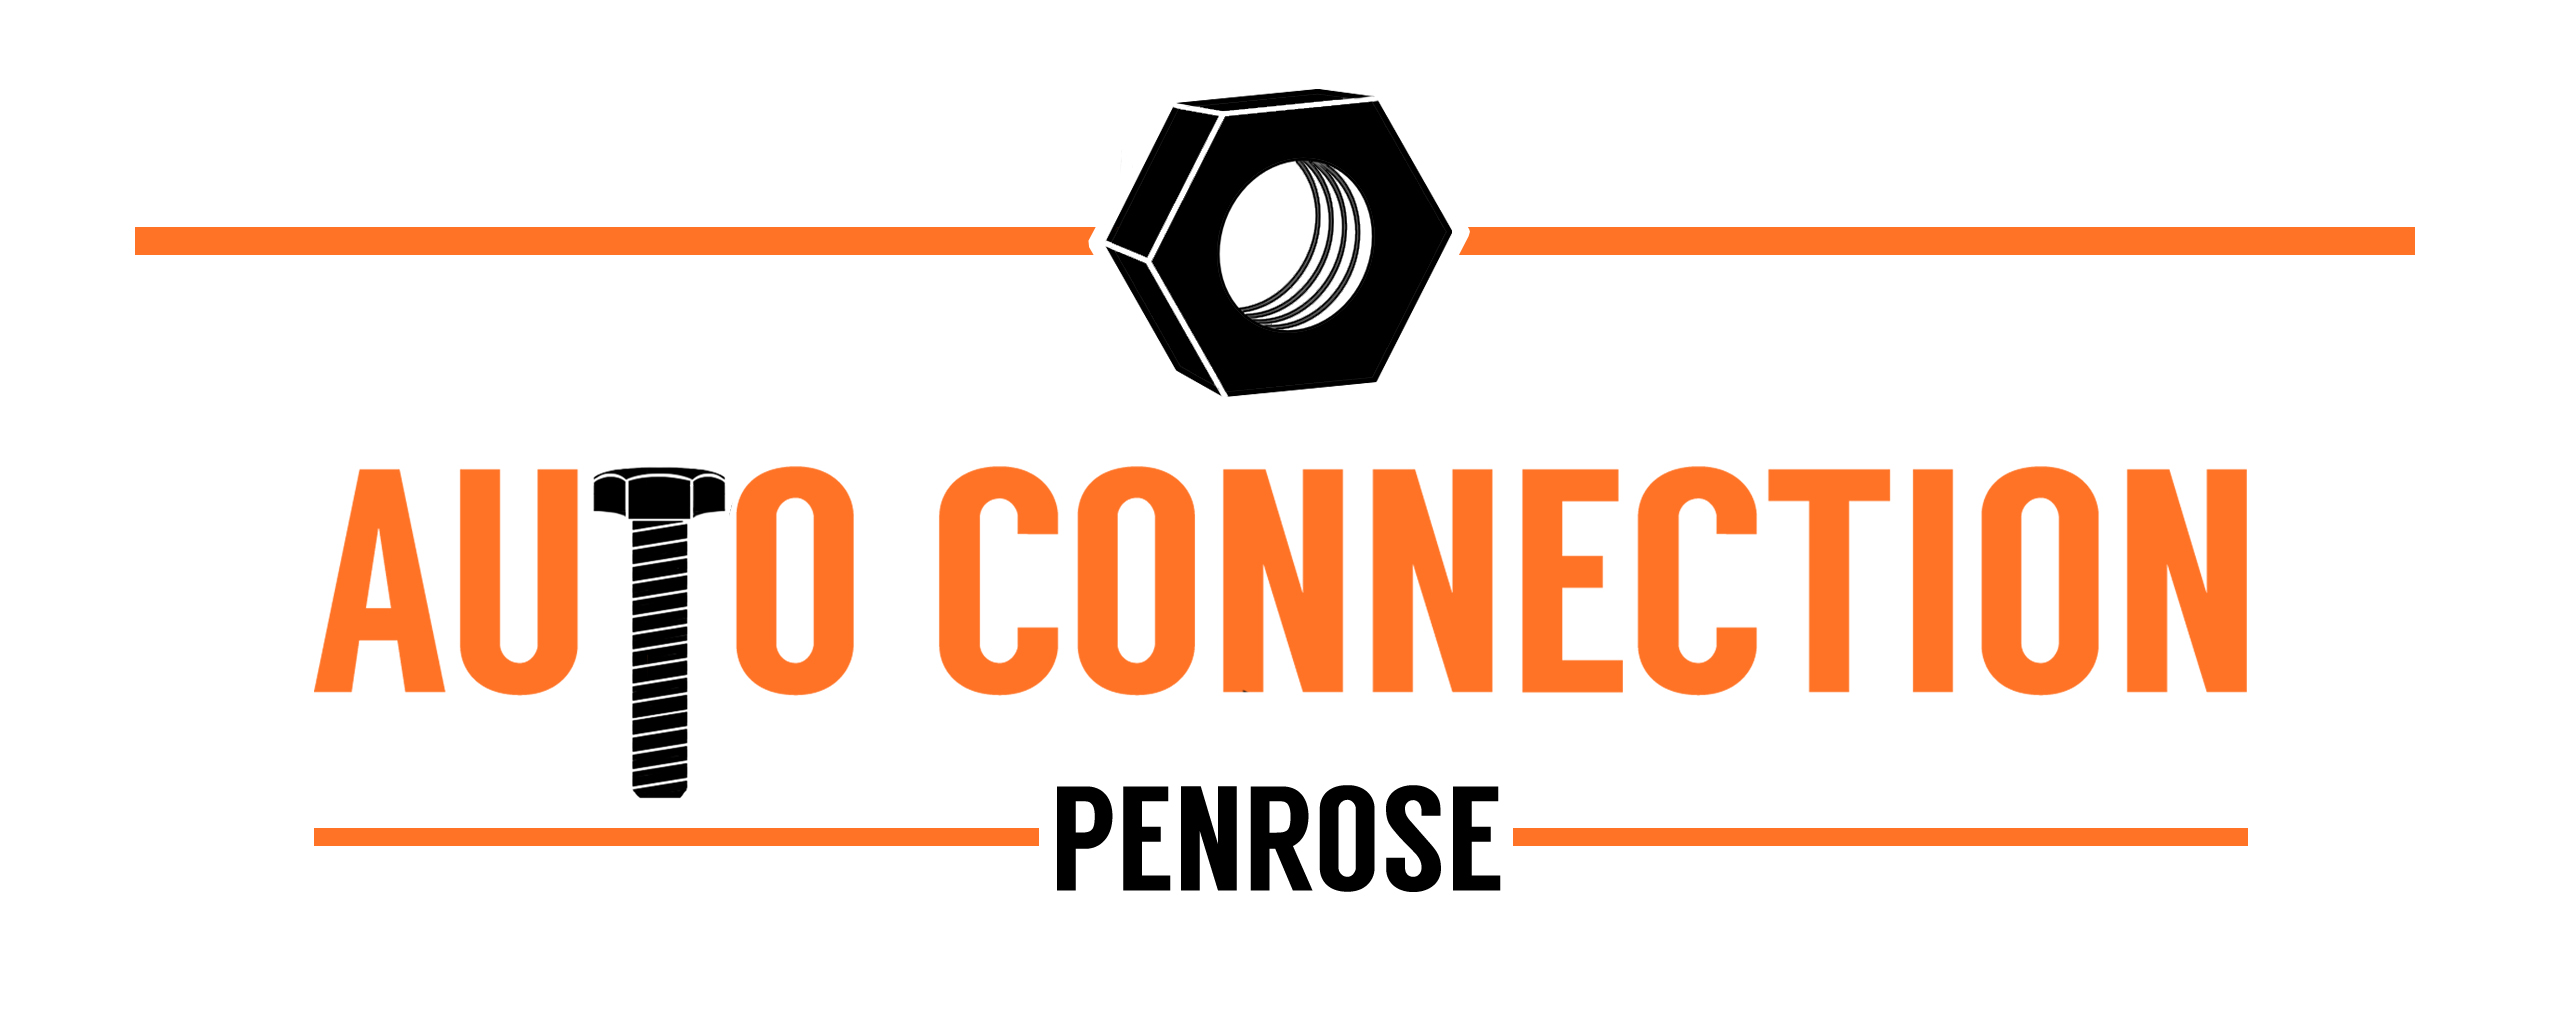 Auto Connection (Penrose)